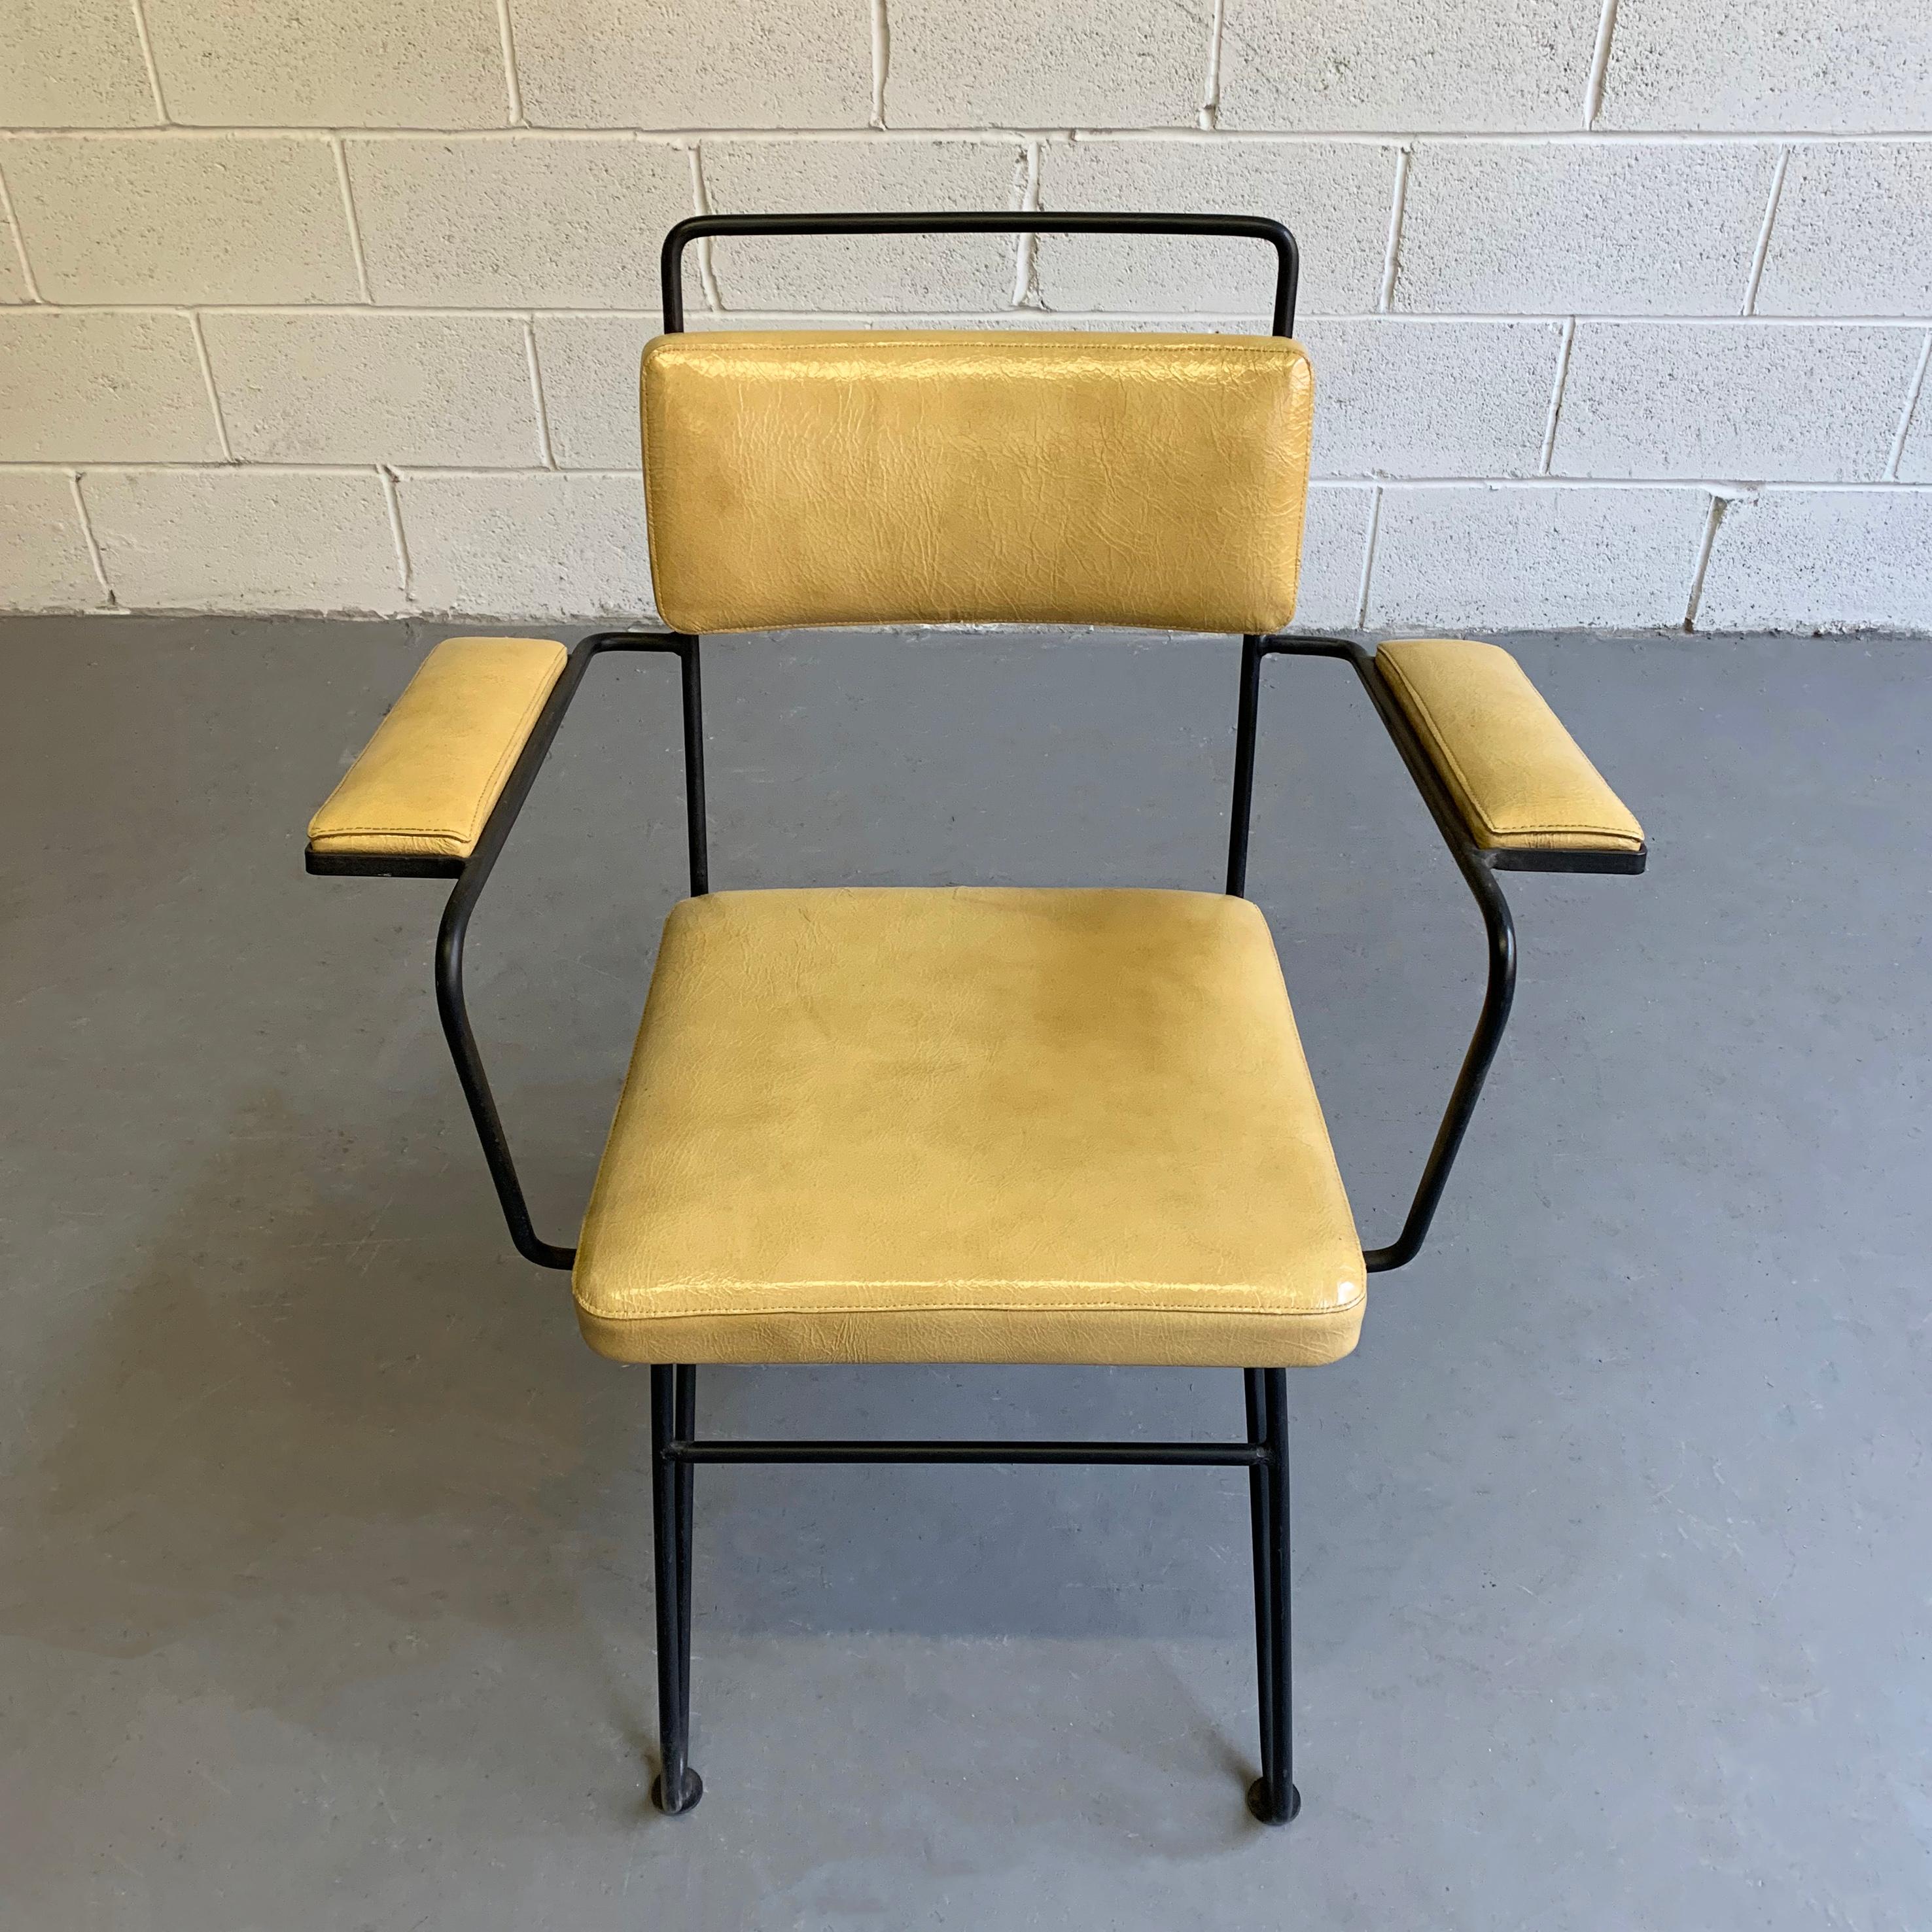 American Mid-Century Modern Wrought Iron Armchair Attributed to Dan Johnson, Pacific Iron For Sale